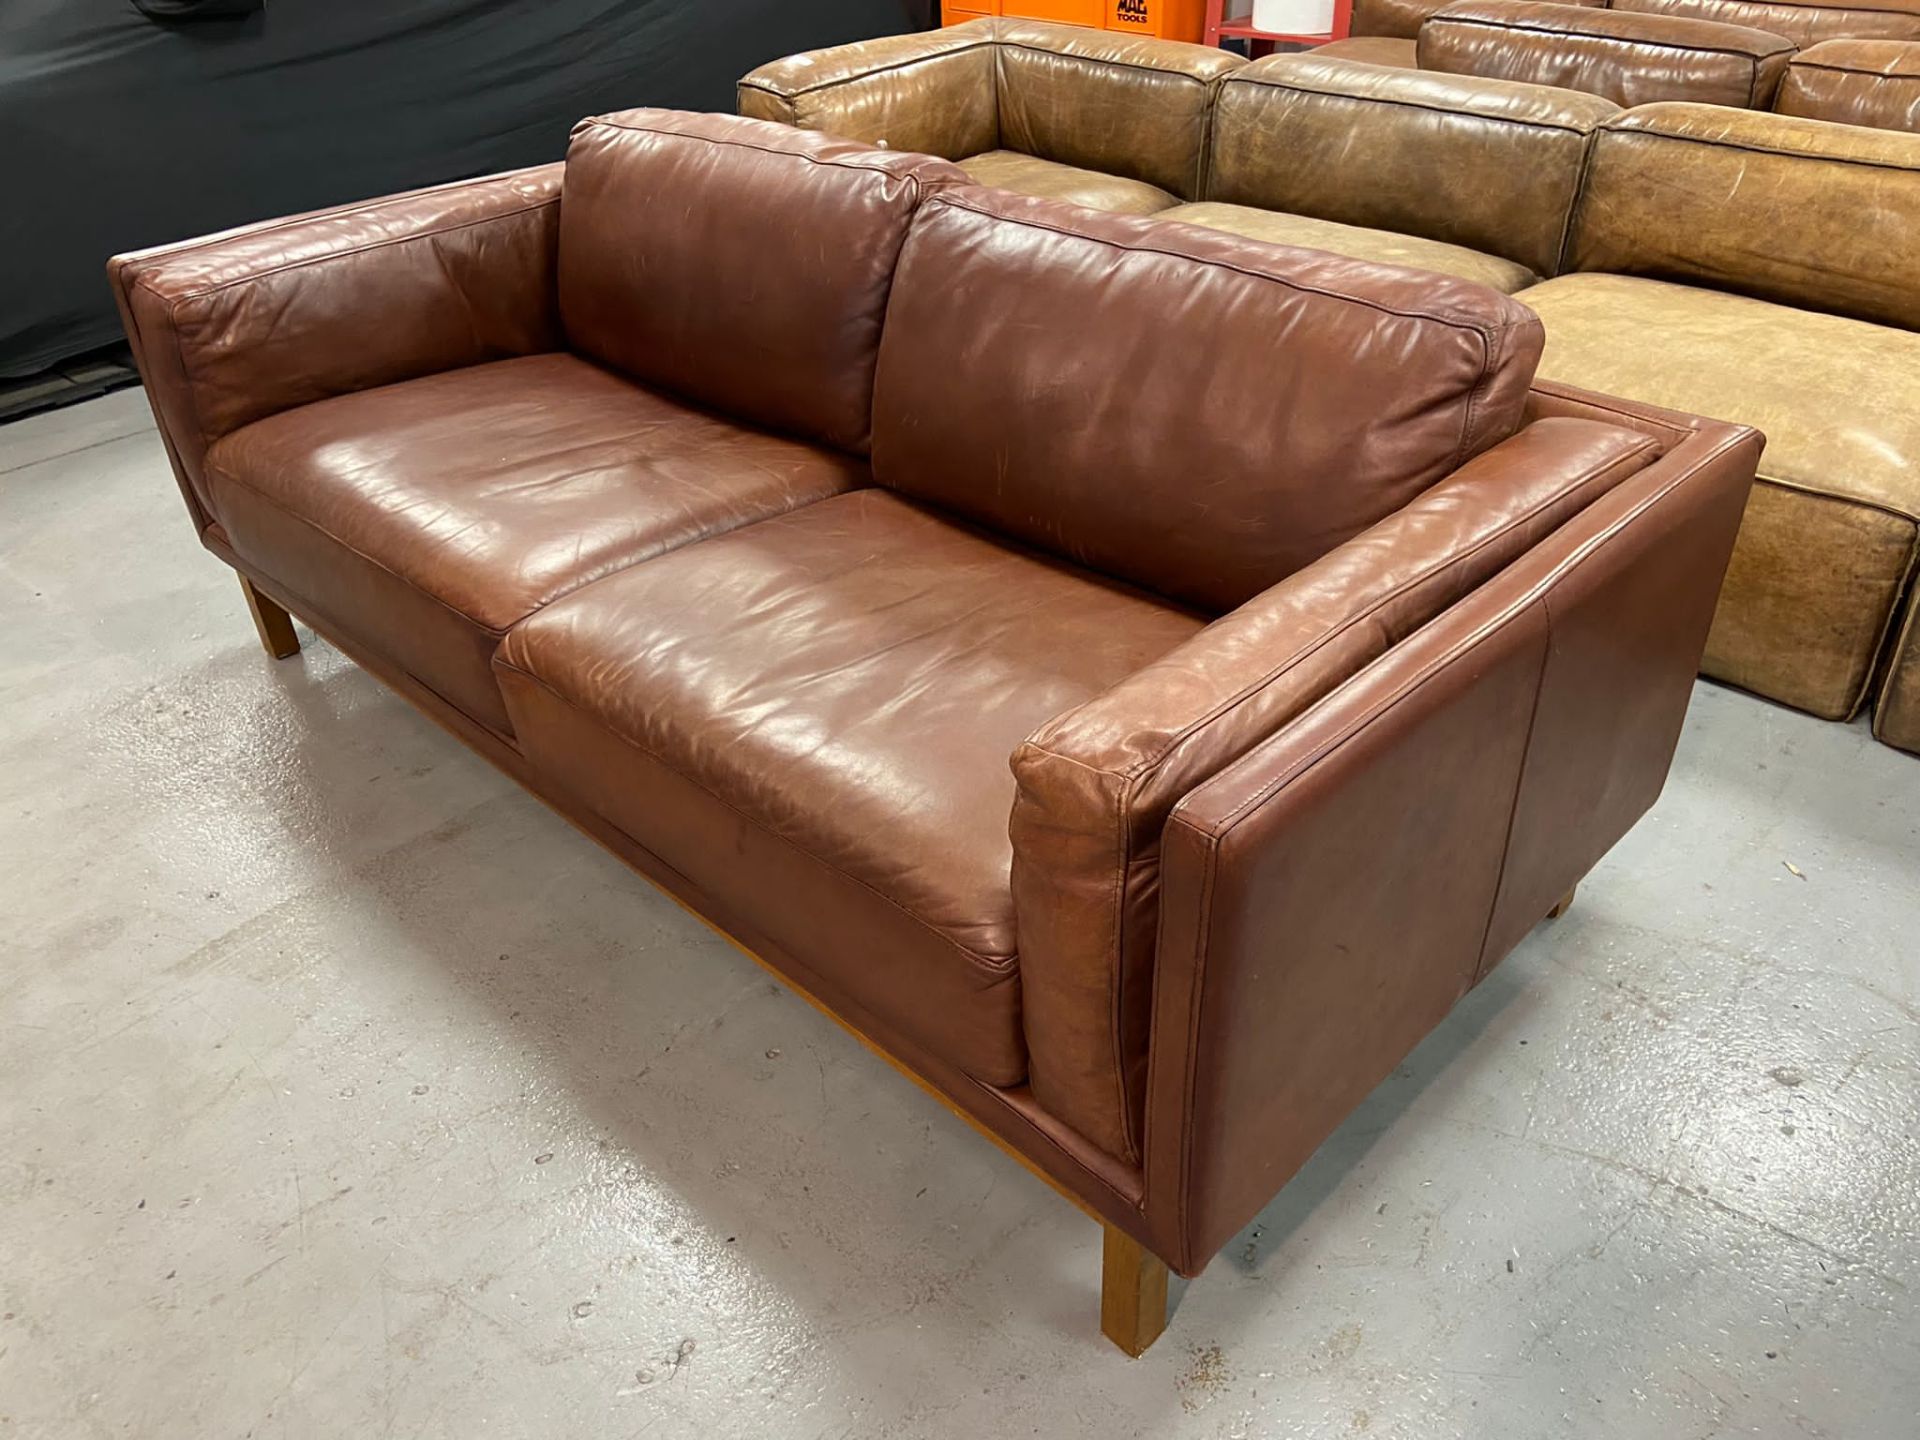 1 x West Elm Dekalb Contemporary Three Seater Sofa - Upholstered in Quality Tan Leather With Oak Fee - Image 5 of 6